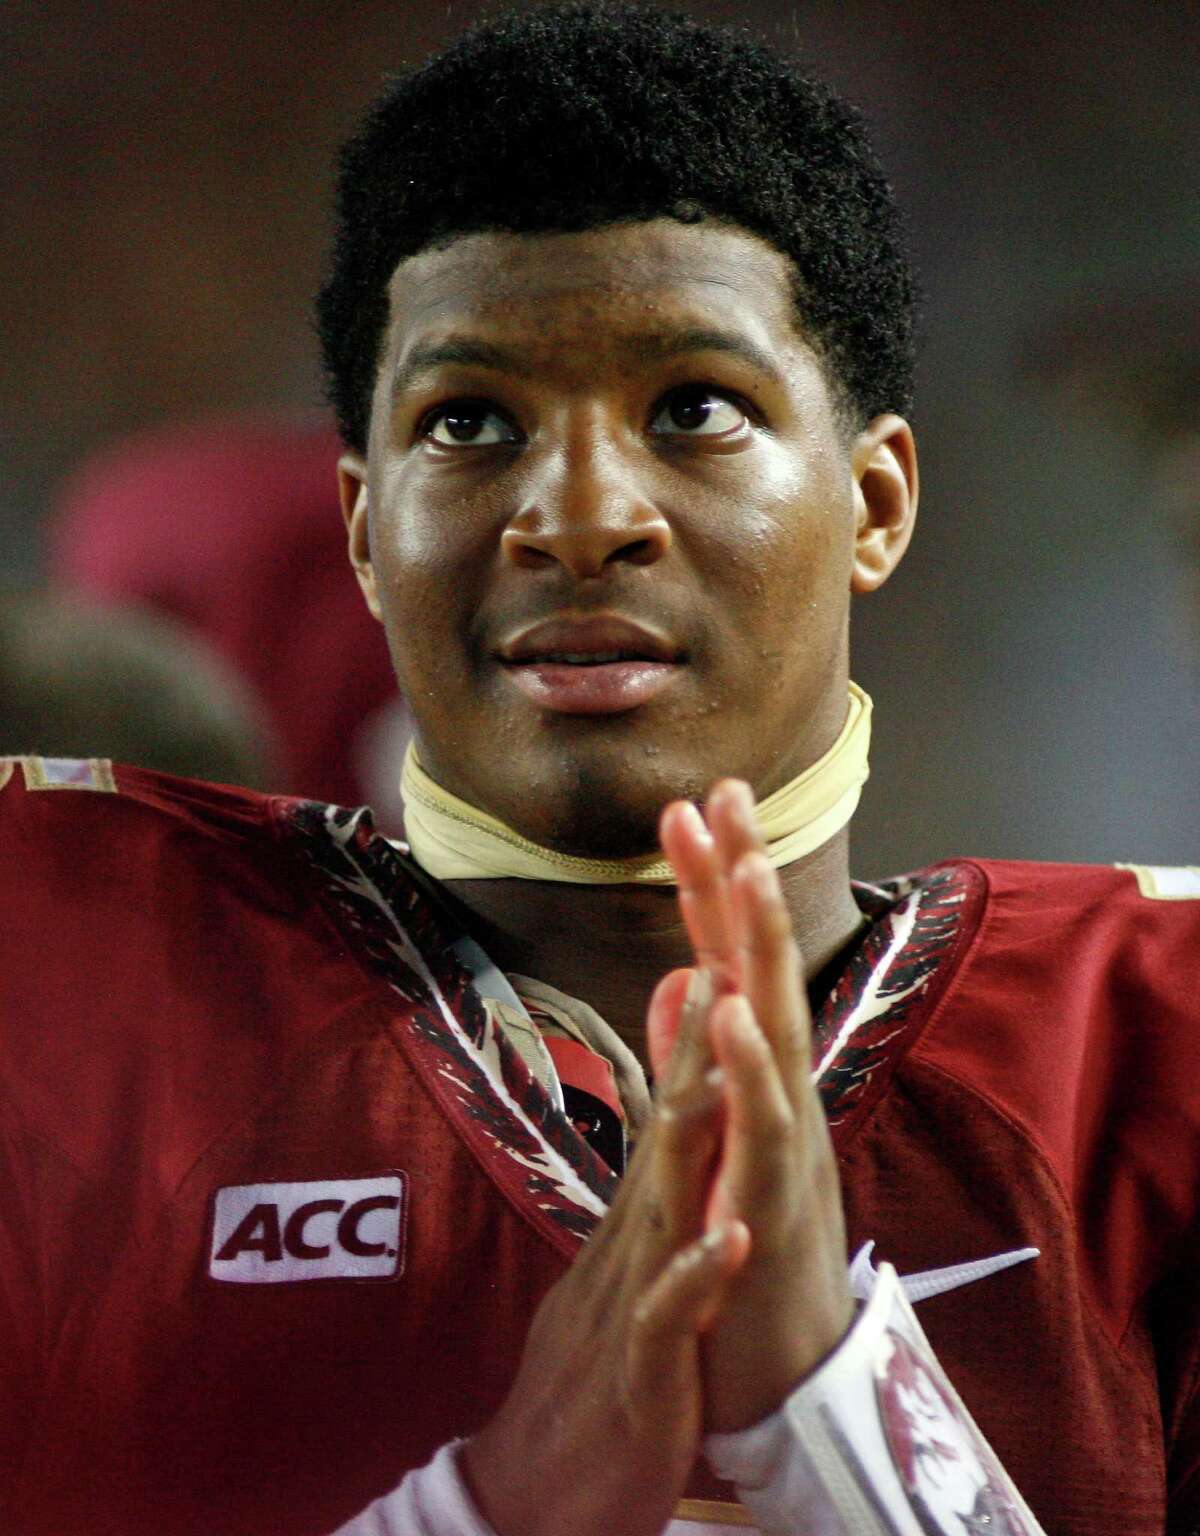 In this Sept. 21, 2013, file photo, Florida State quarterback Jameis Winston watches from the sidelines during the second half against Bethune-Cookman in Tallahassee, Fla. Search warrants, released Dec. 5, 2013, in the sexual assault investigation of Winston indicate the woman told police she was raped at an apartment after a night of drinking at a bar. State Attorney Willie Meggs said there was not enough evidence to pursue charges in the sex assault case against Winston.